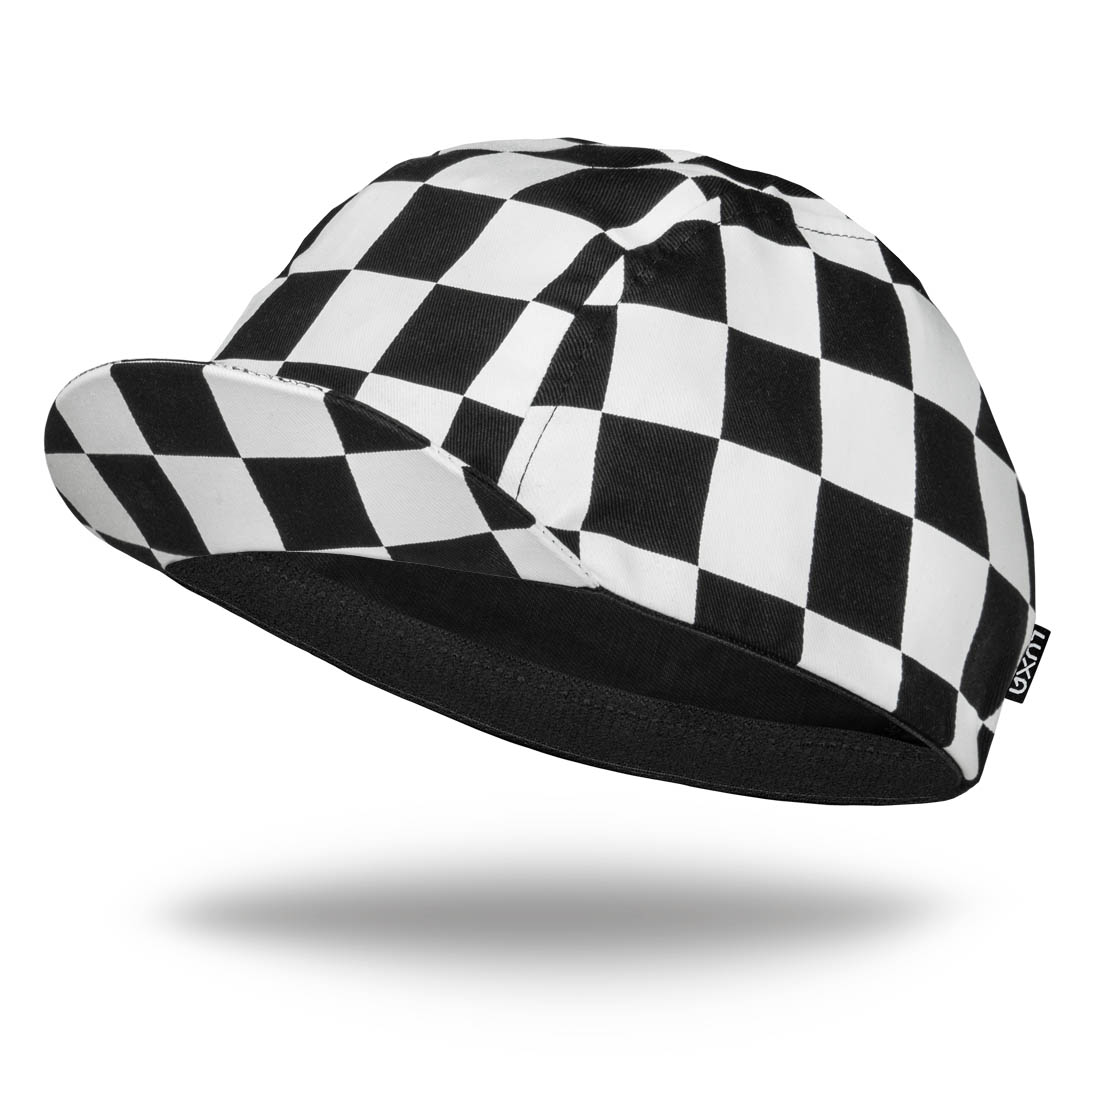 cotton cap to wear under helmet designed with black and white squares pattern